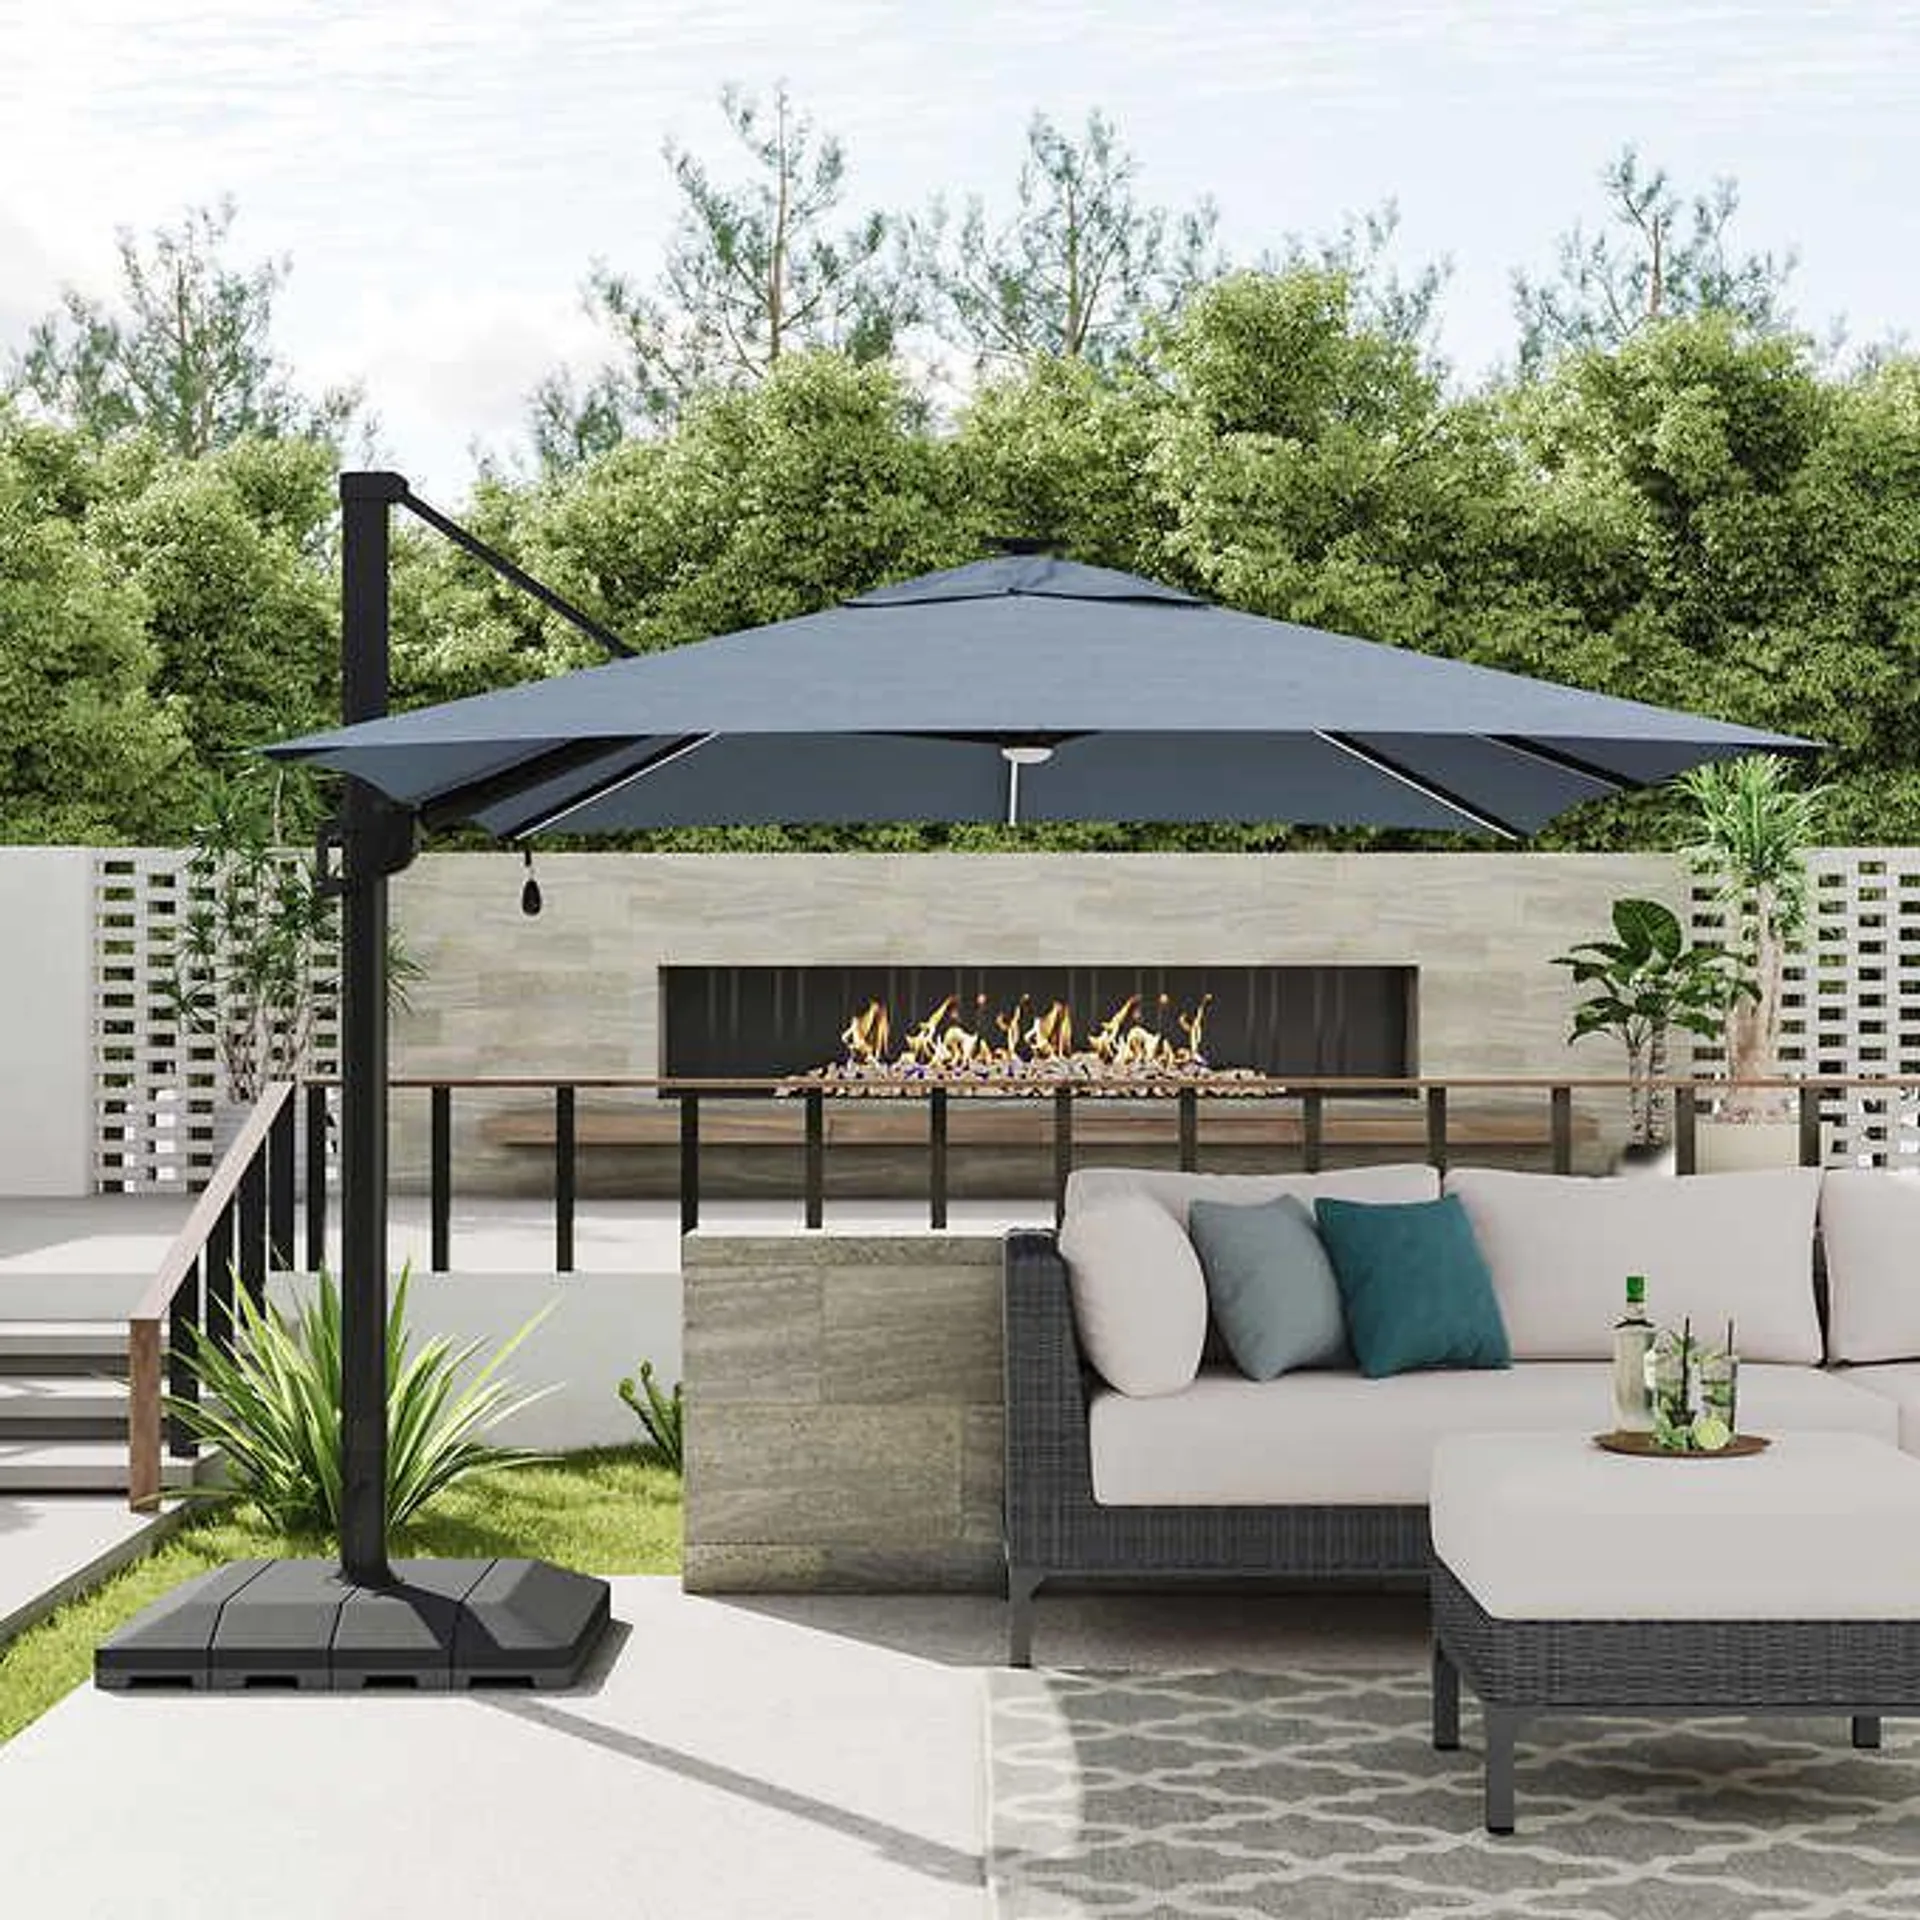 Sirio 4 m x 3 m (13 ft. x 10 ft.) Cantilever Umbrella with Solar Powered LED